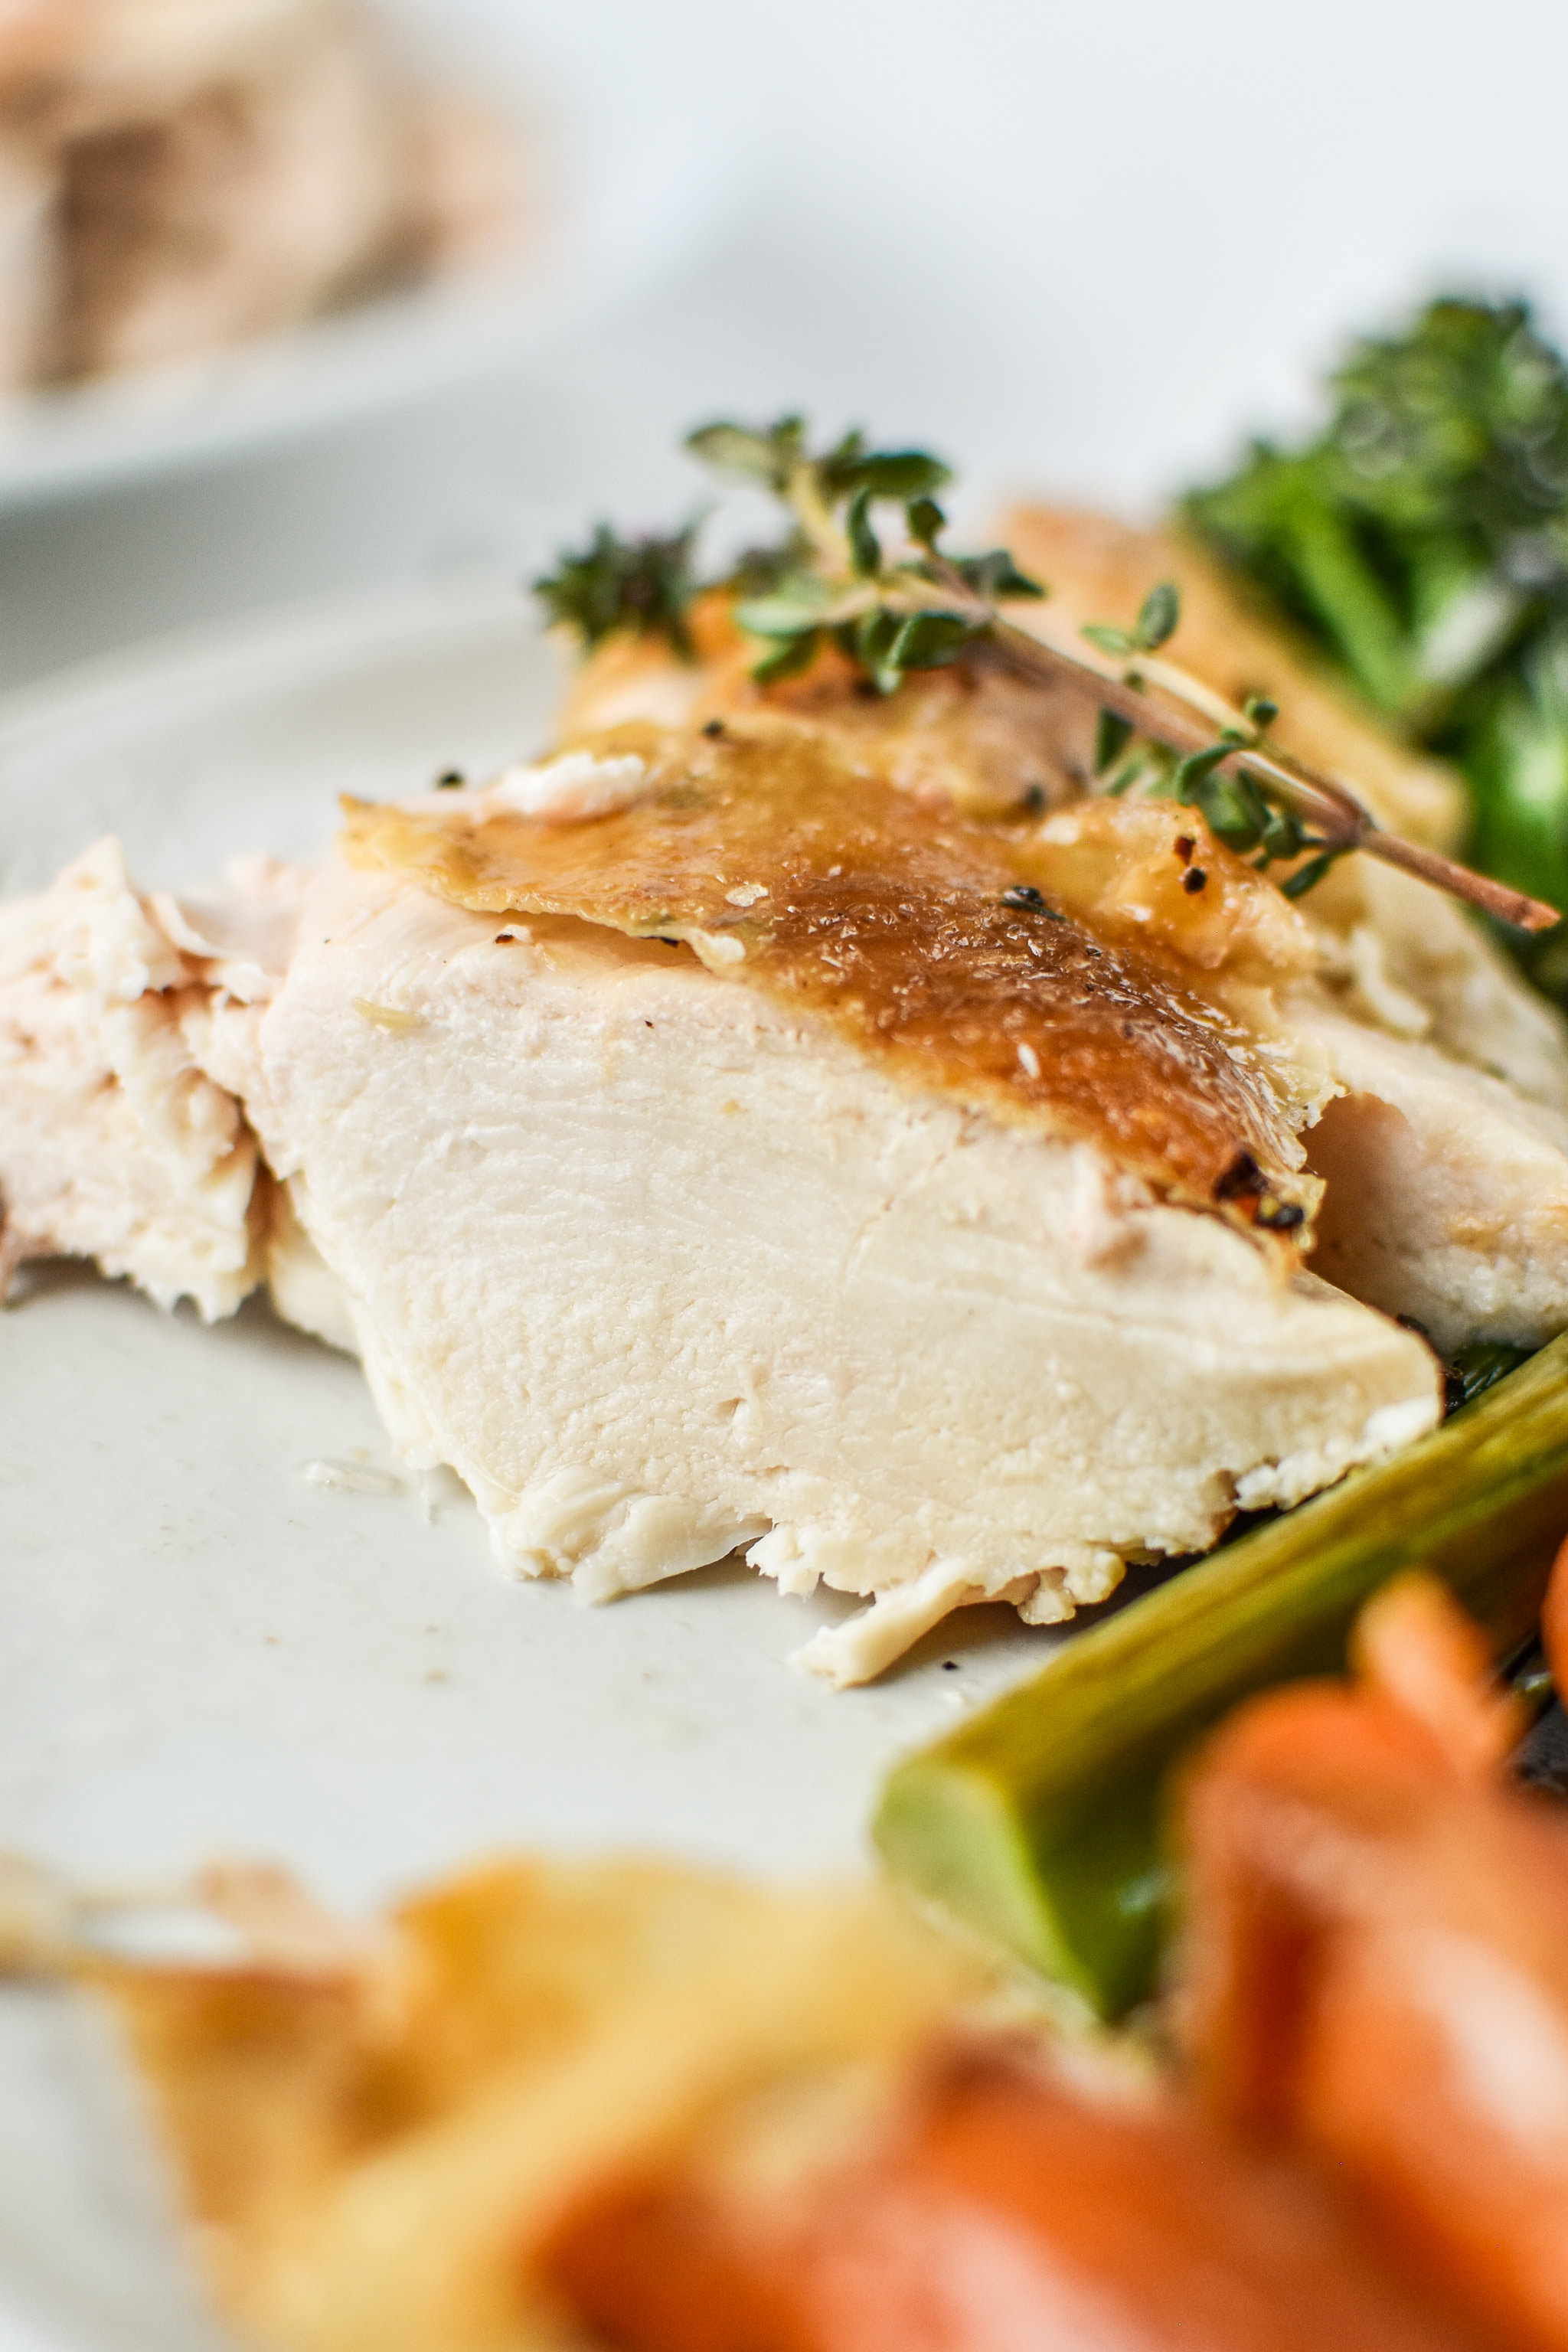 Chicken breast perfectly cooked from the simple whole roast chicken.